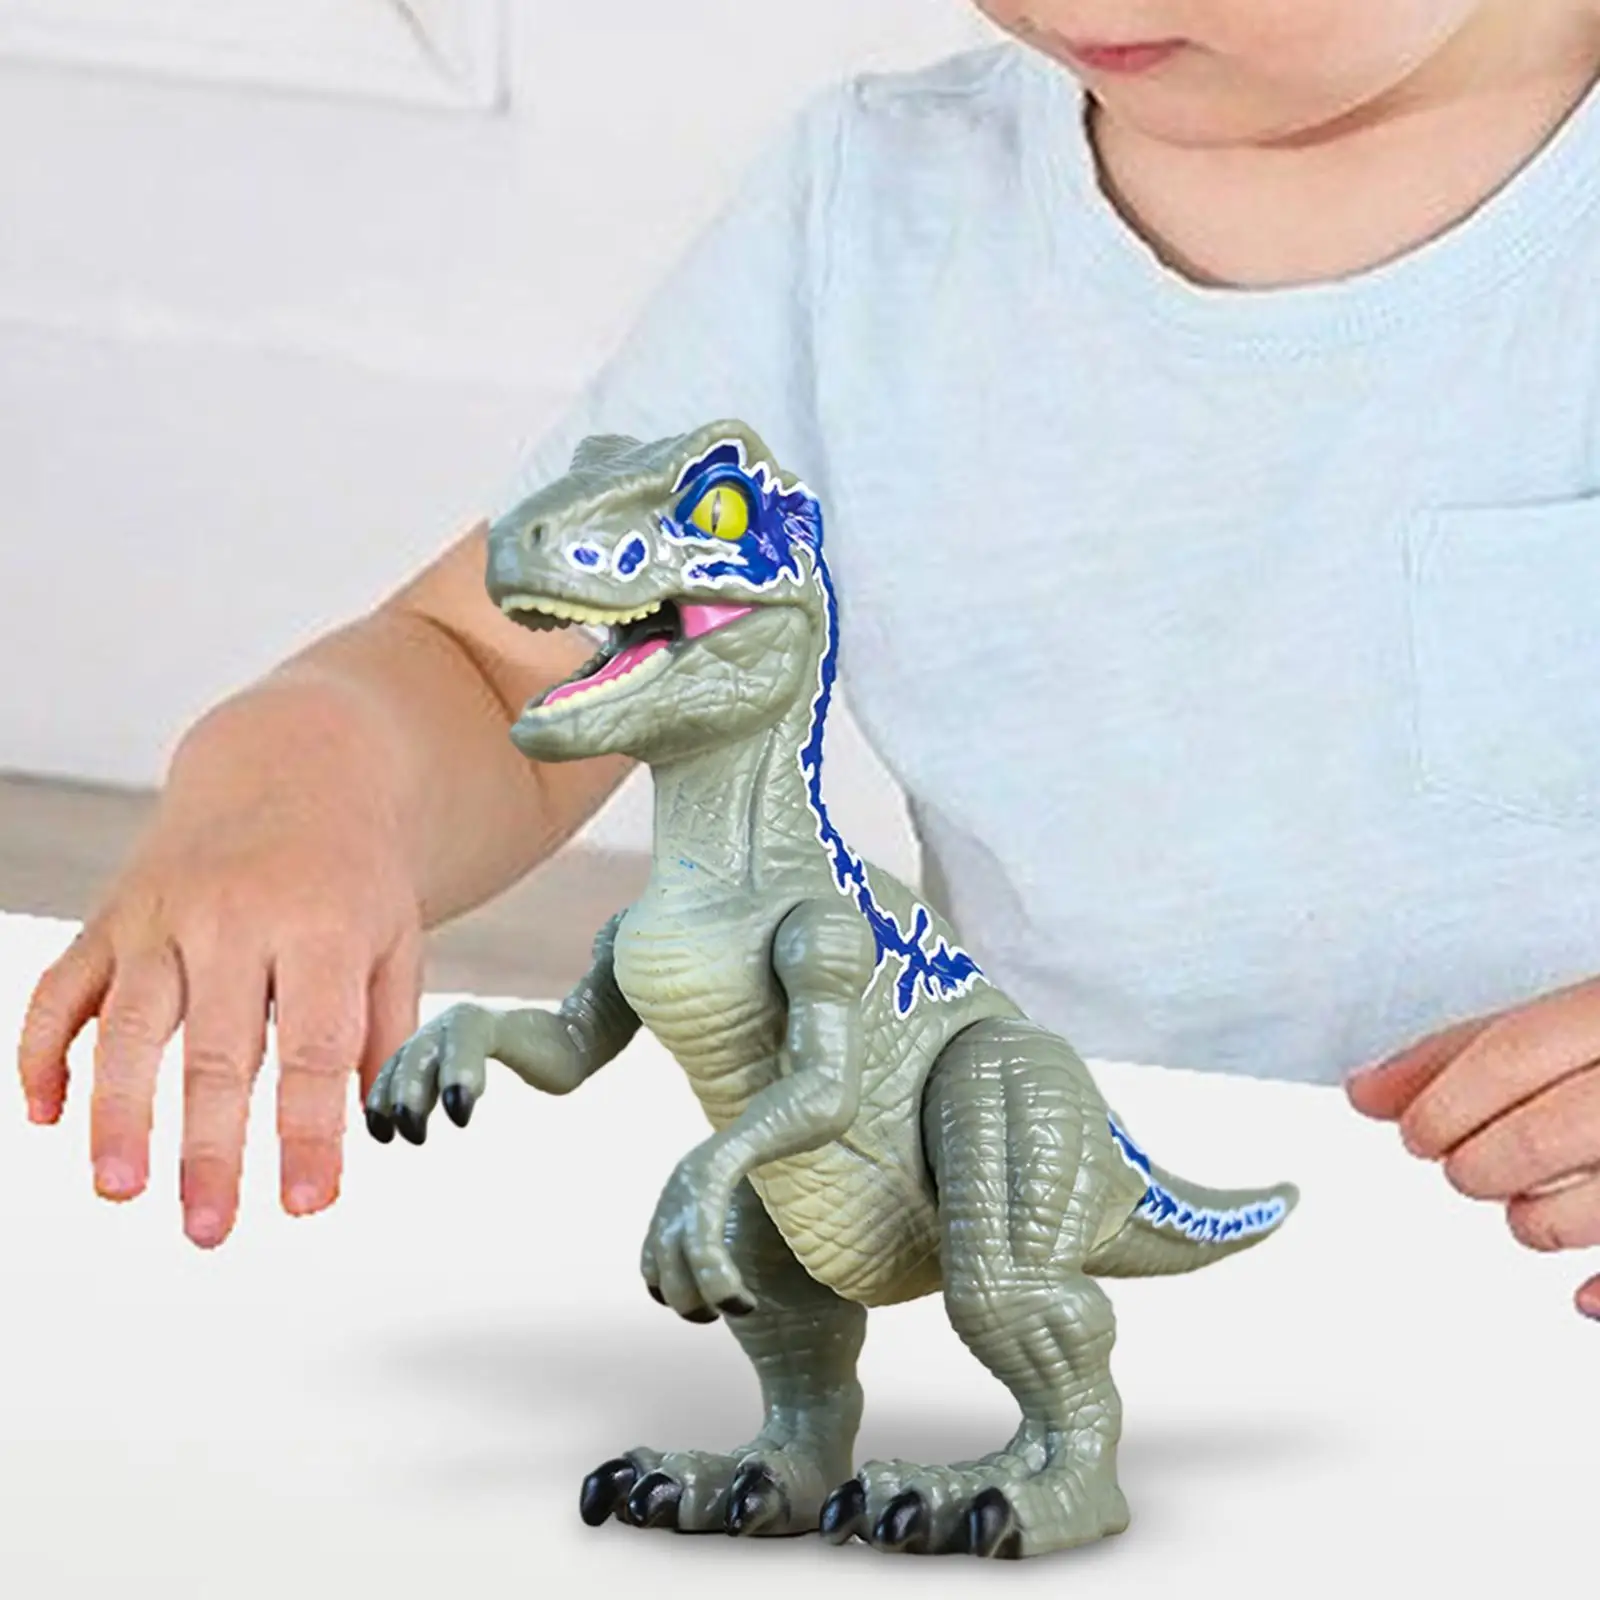 Dinosaur Action Figure Toy Animal Model Figure, Simulated Dinosaur Toy Movable Joints for Cars Party Favors Travel Role Play